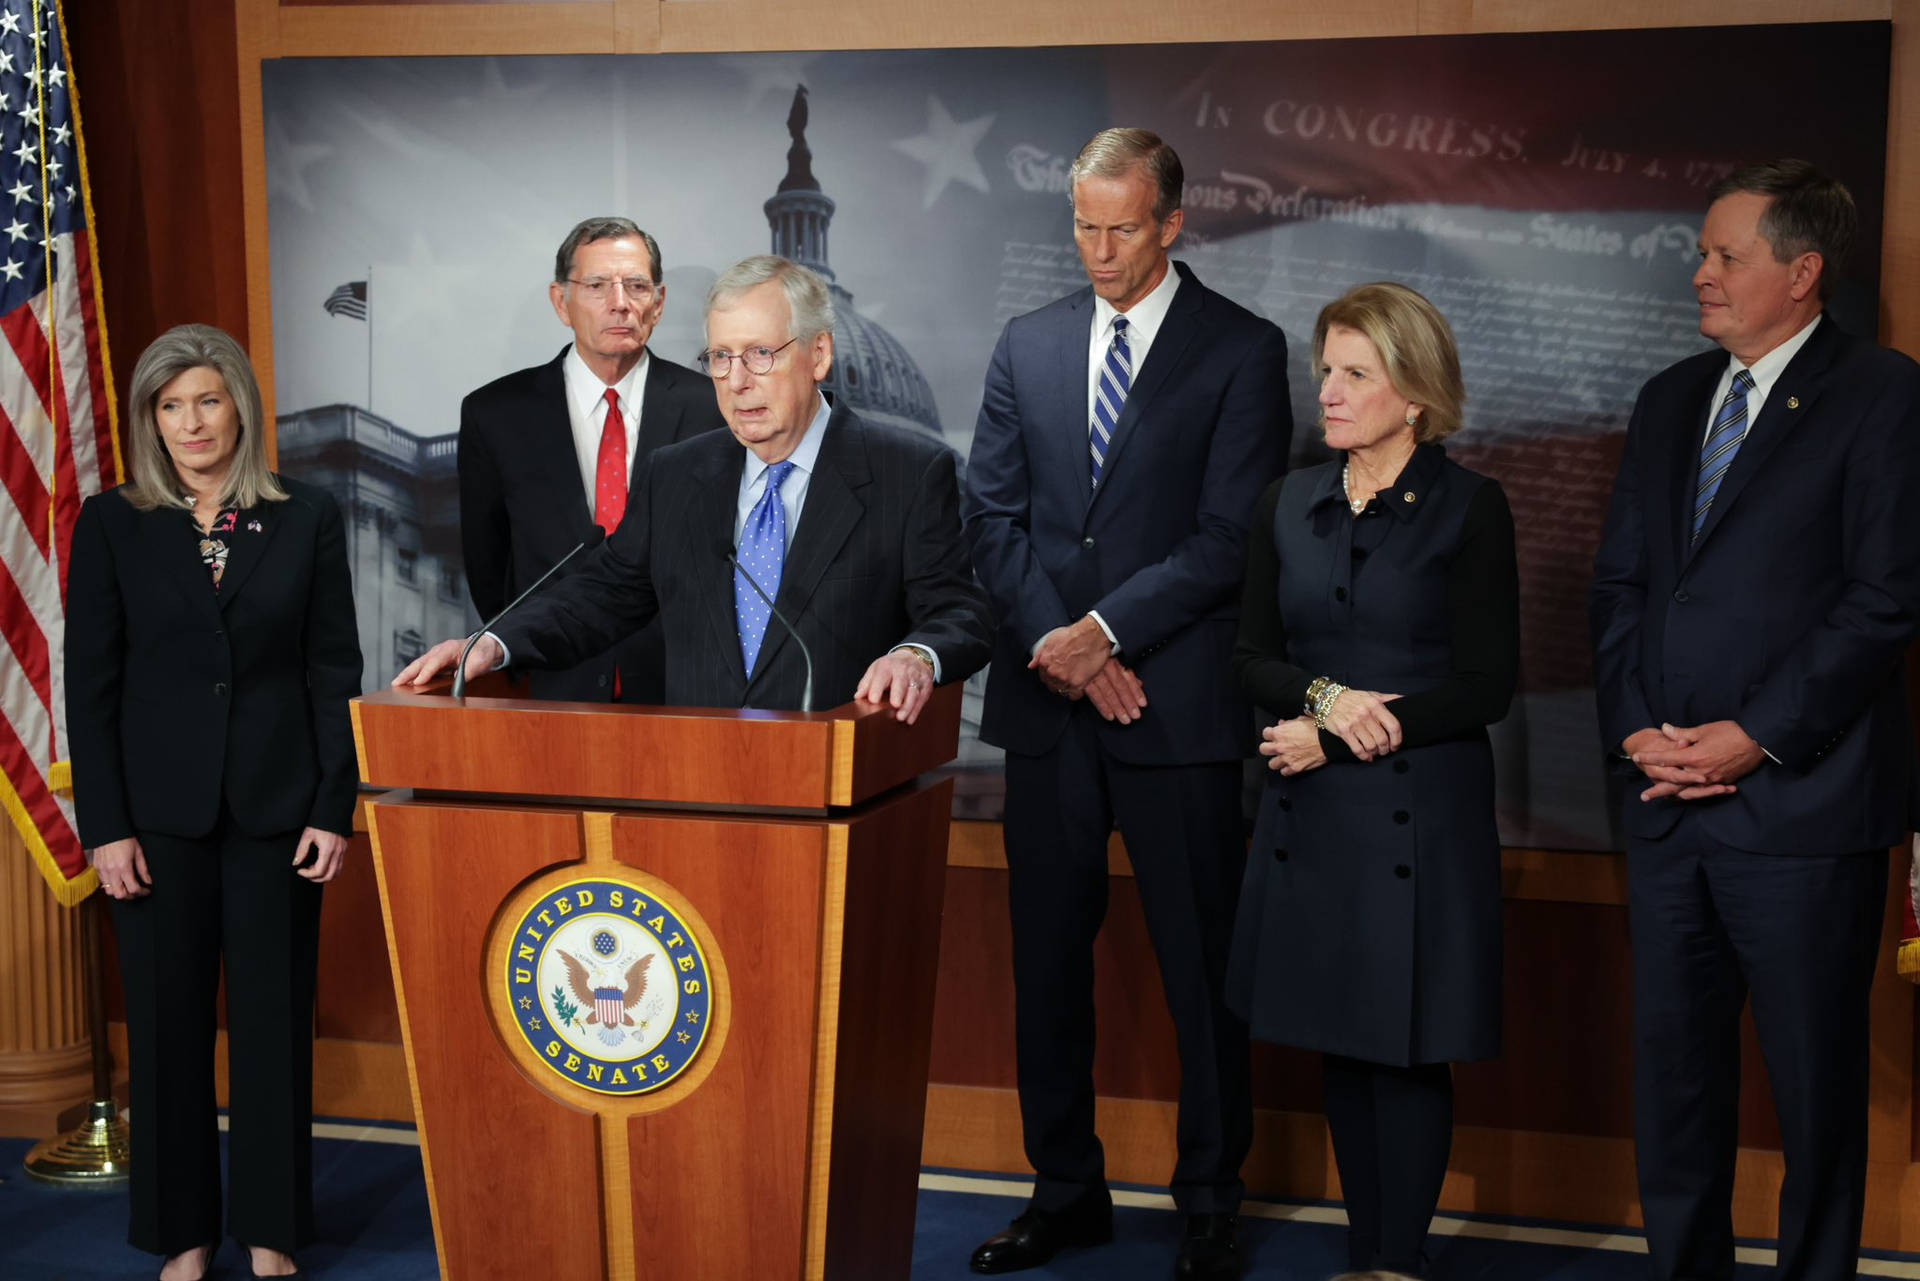 Mitch McConnell critiquing policies during a news conference Wallpaper